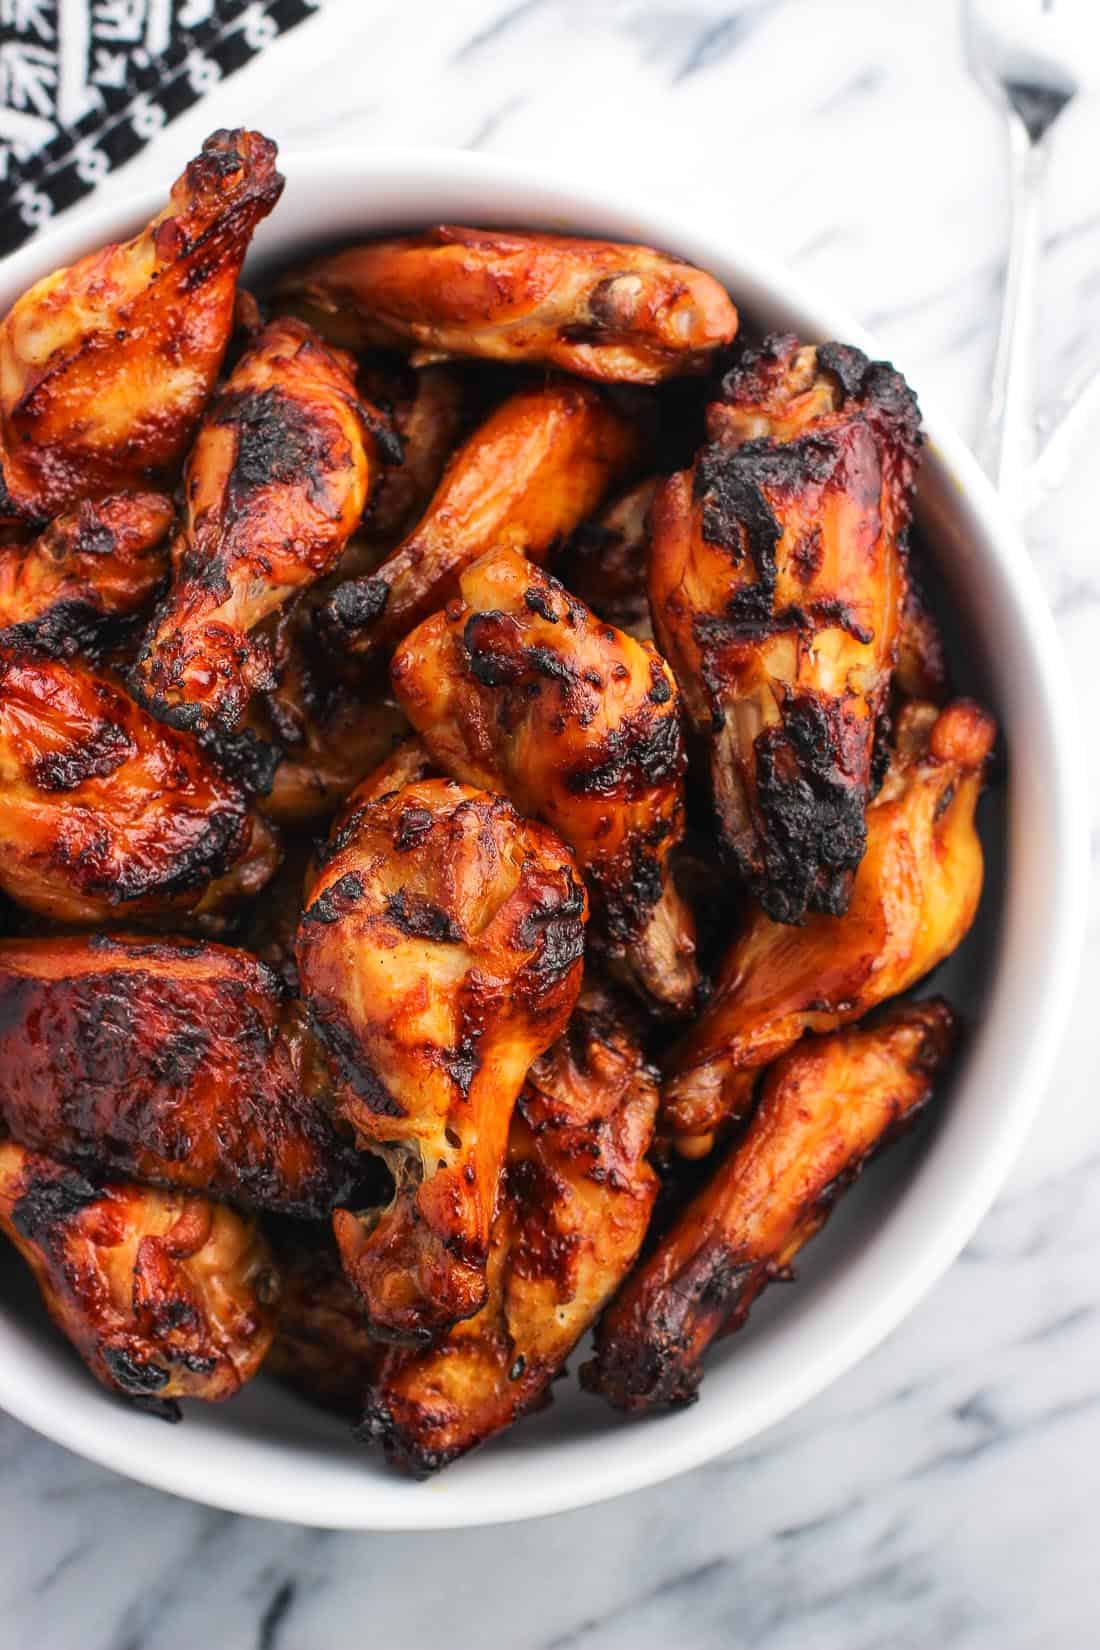 Grilled Spicy Soy Chicken Wings,Bake Bacon In Oven 425